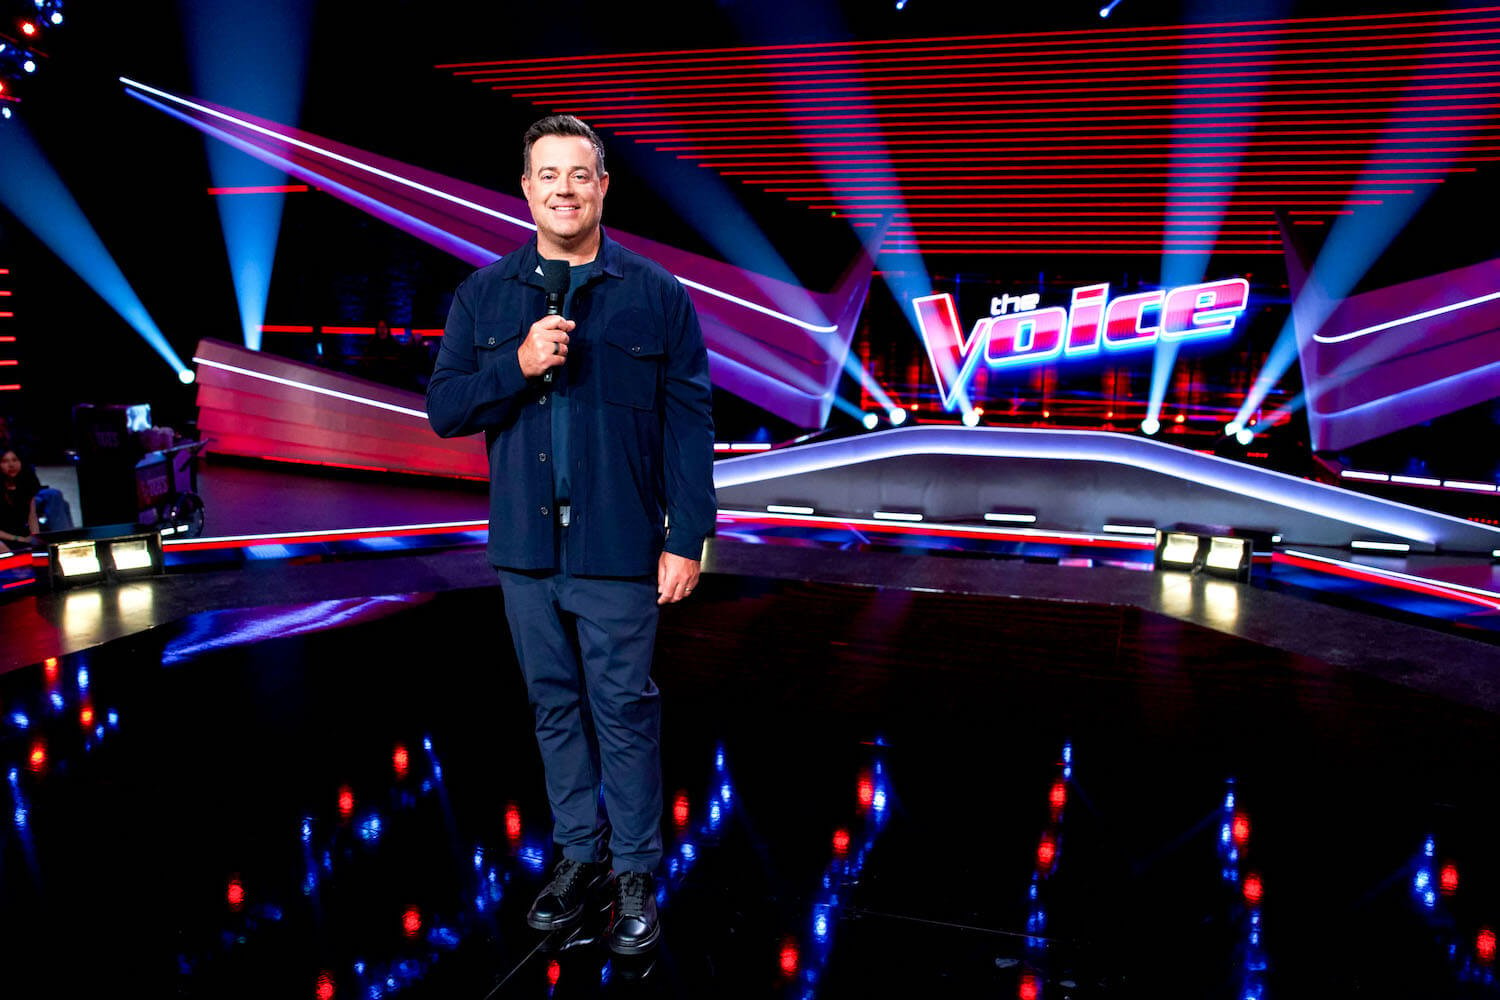 Carson Daly holding a microphone with 'The Voice' logo in the background